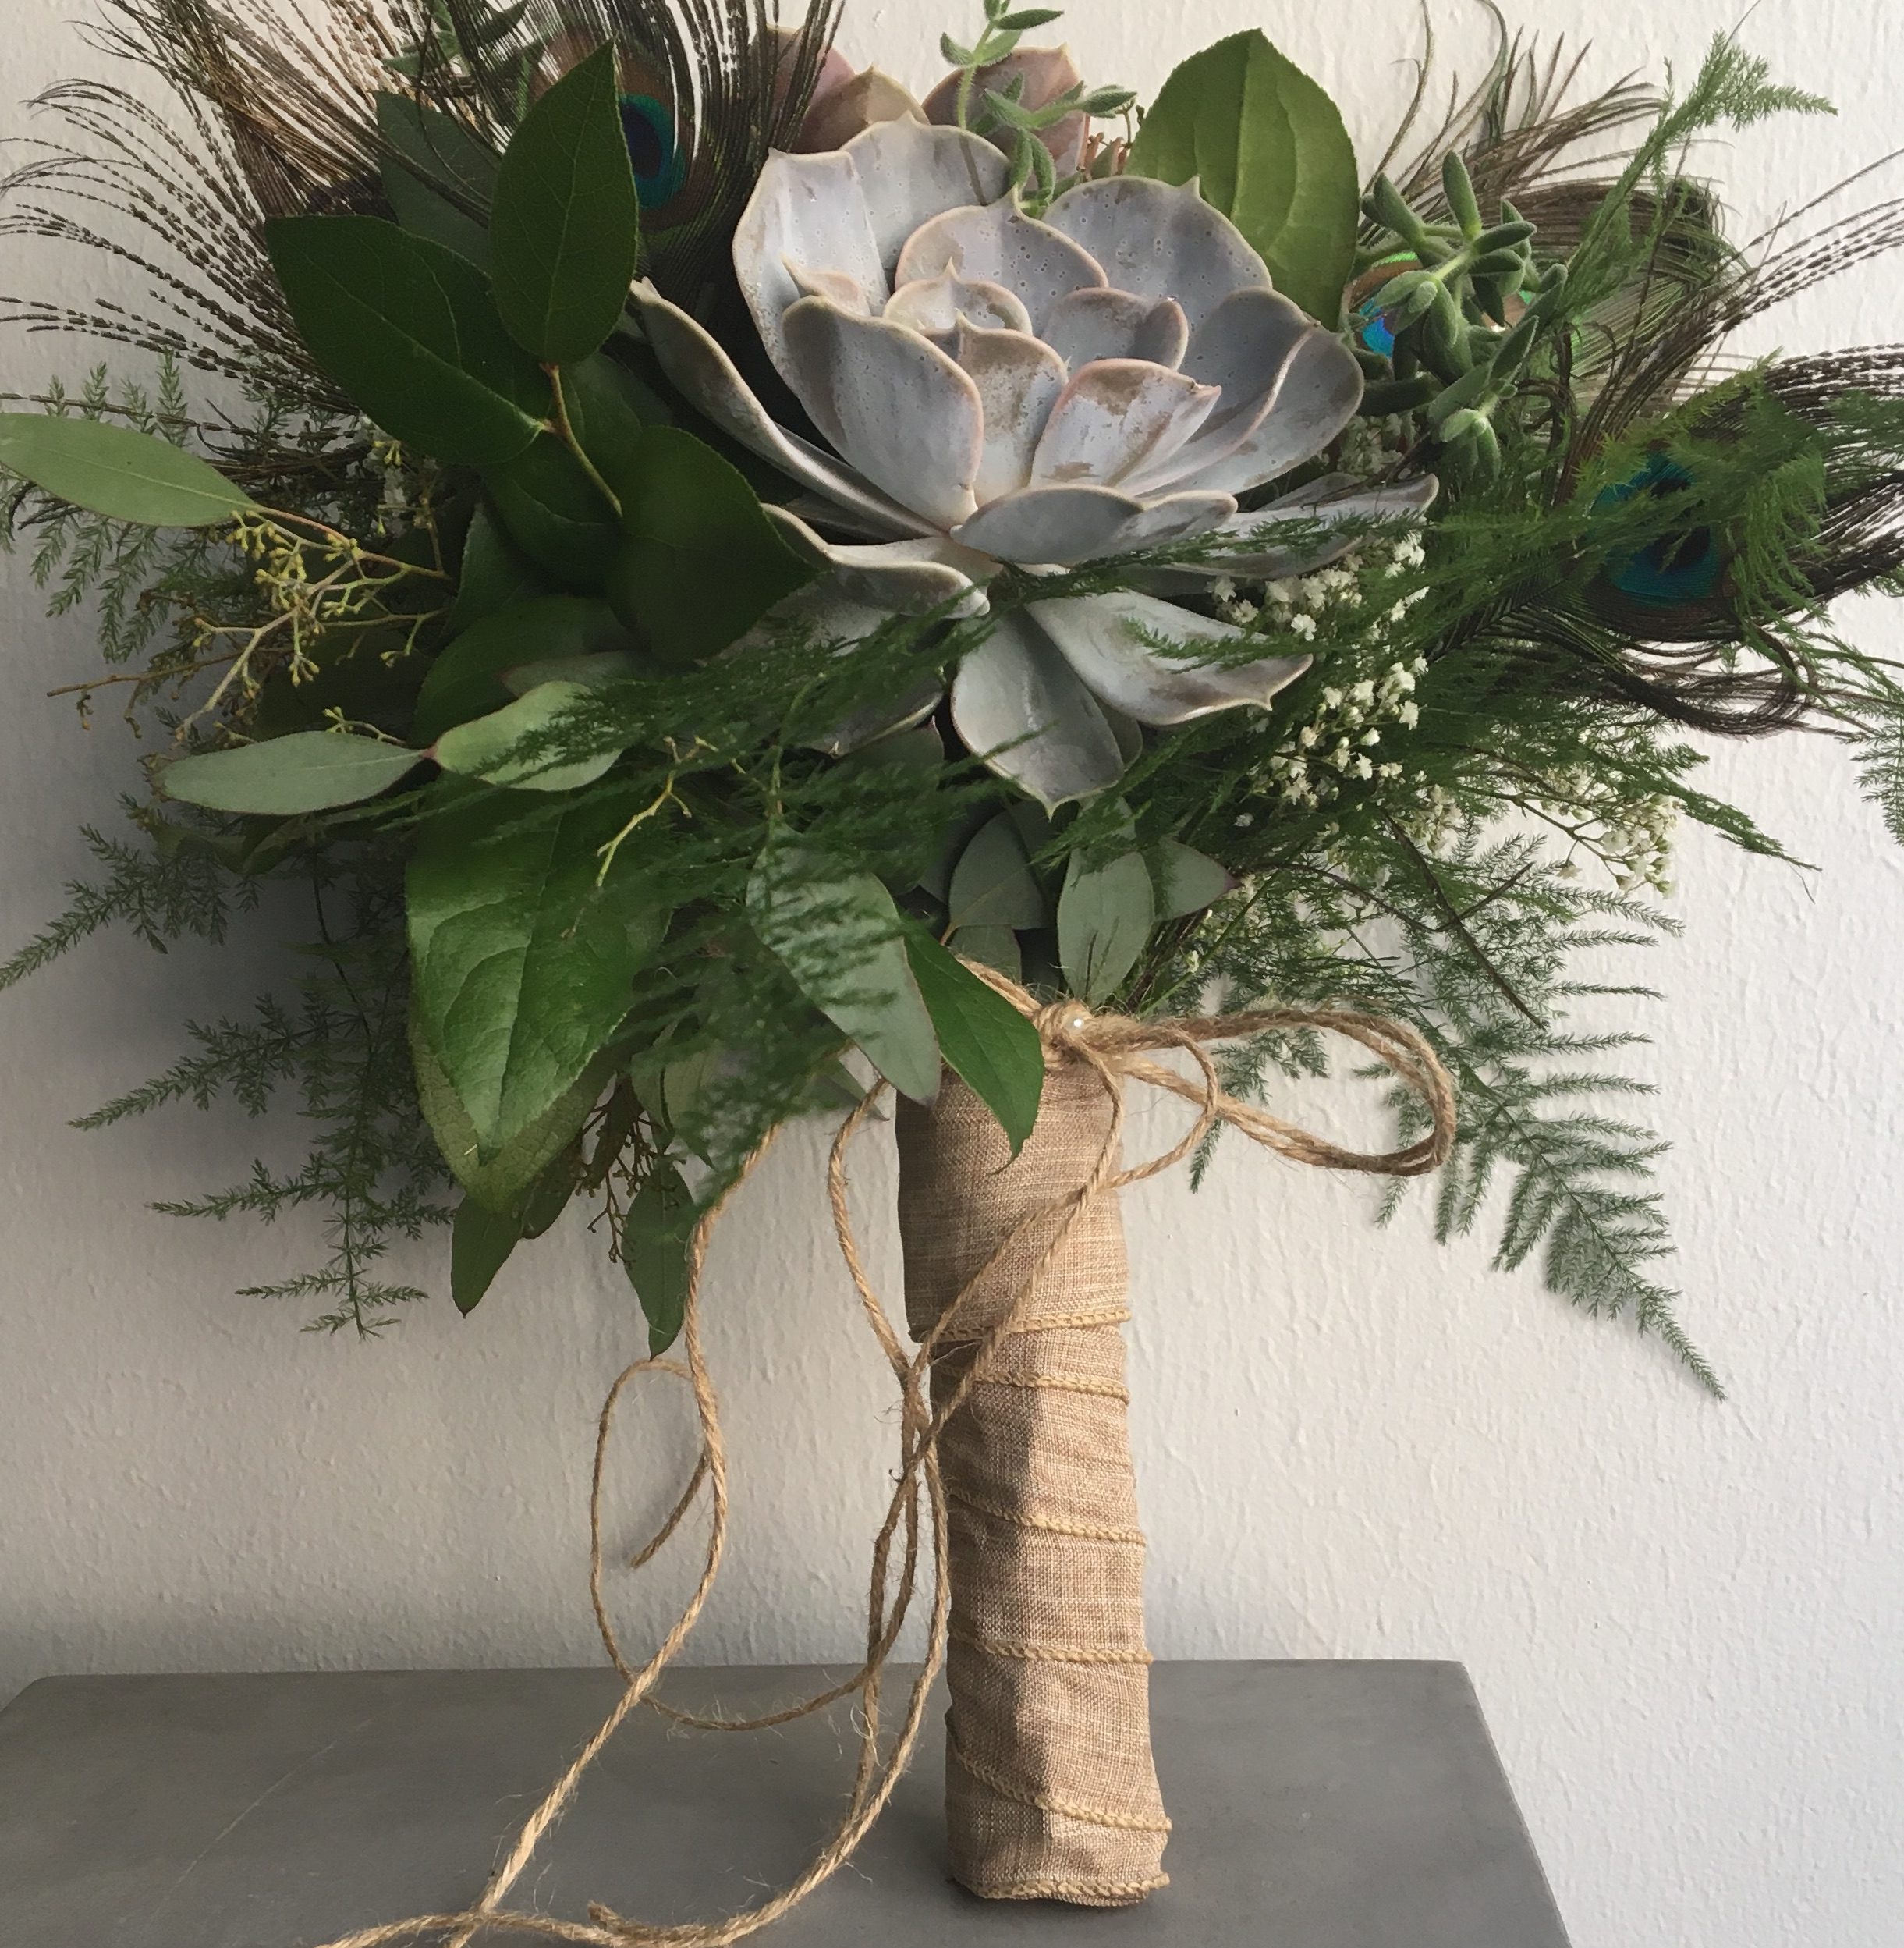 Because the Succulents and greens last out of water, we were able to use a Ballerina Wrap on the handle to hide the mechanics. This was a very popular wrap in the last decade for hand-tied bouquets.